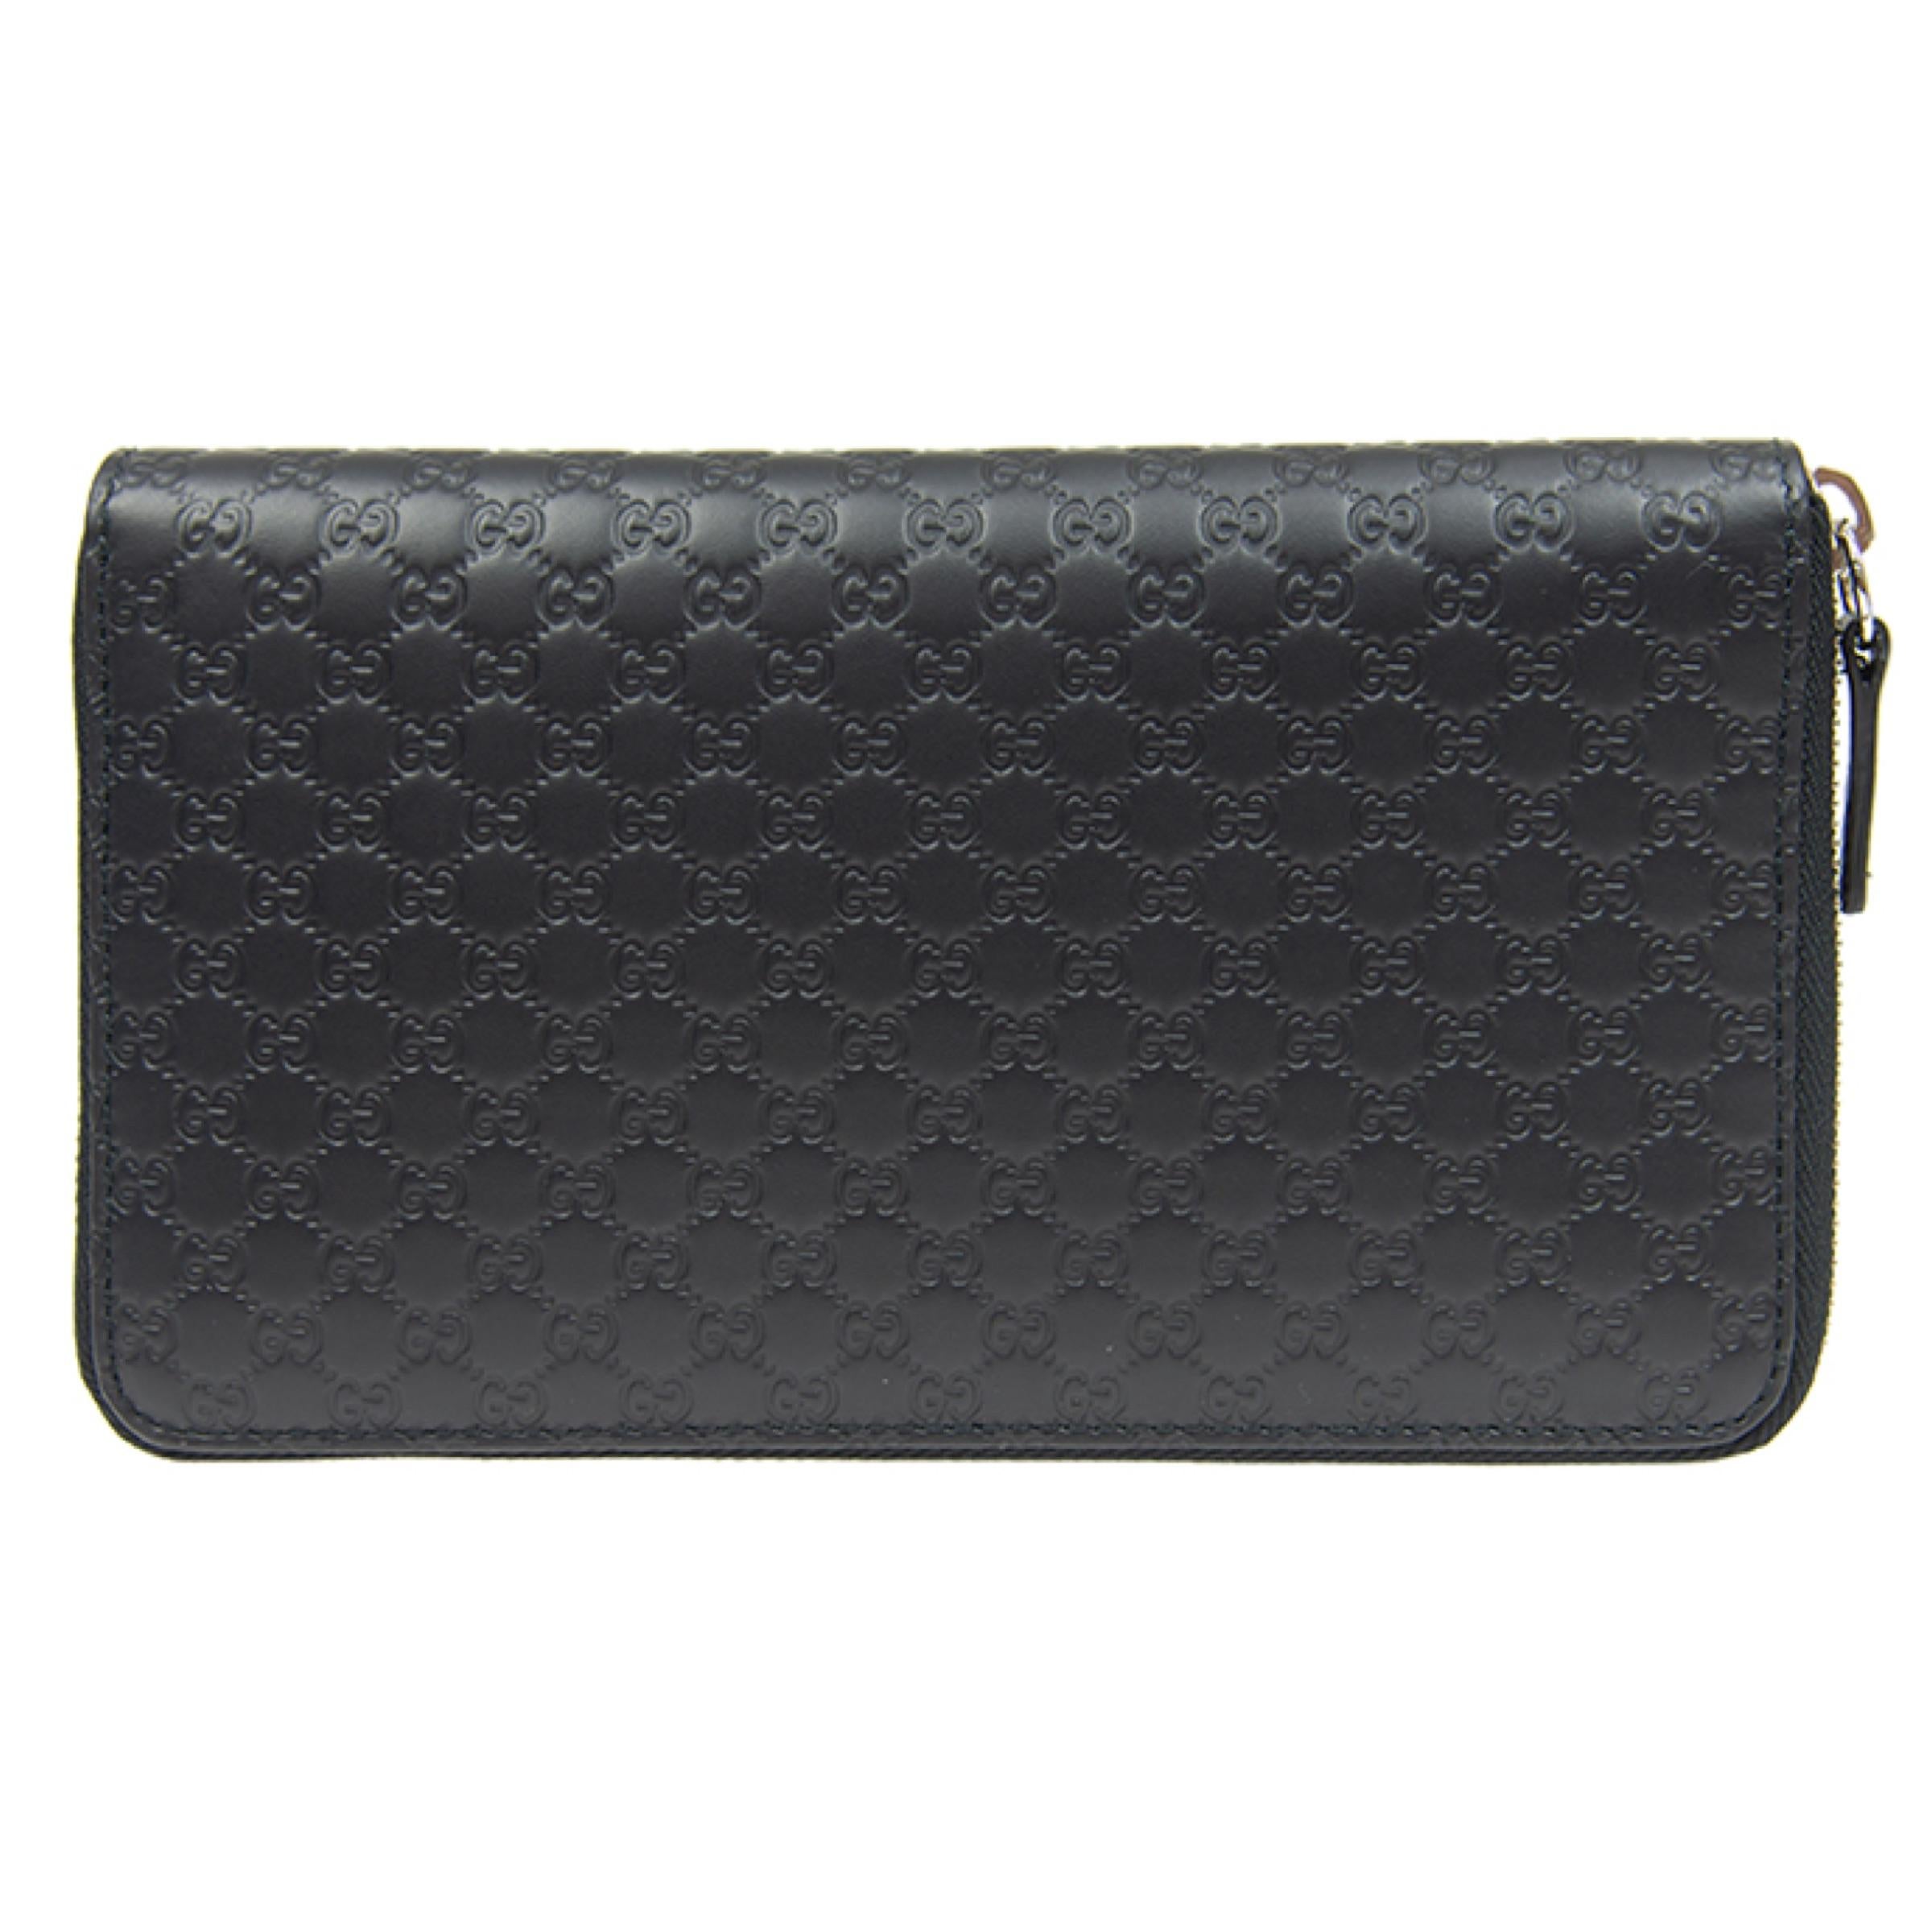 Women's or Men's NEW Gucci Black GG Guccissima Monogram Leather Zip Around Clutch Bag For Sale